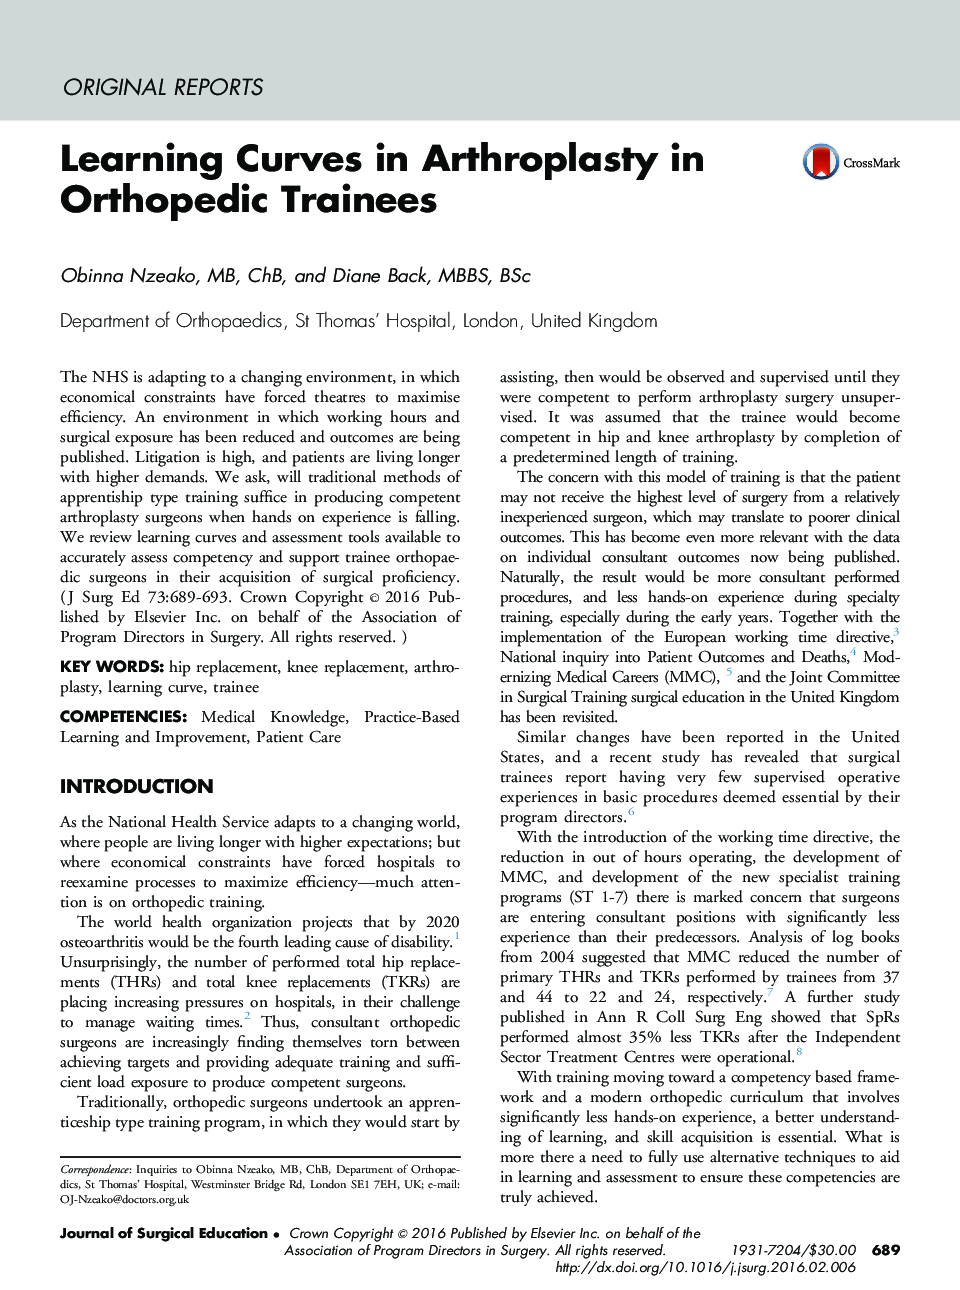 Learning Curves in Arthroplasty in Orthopedic Trainees